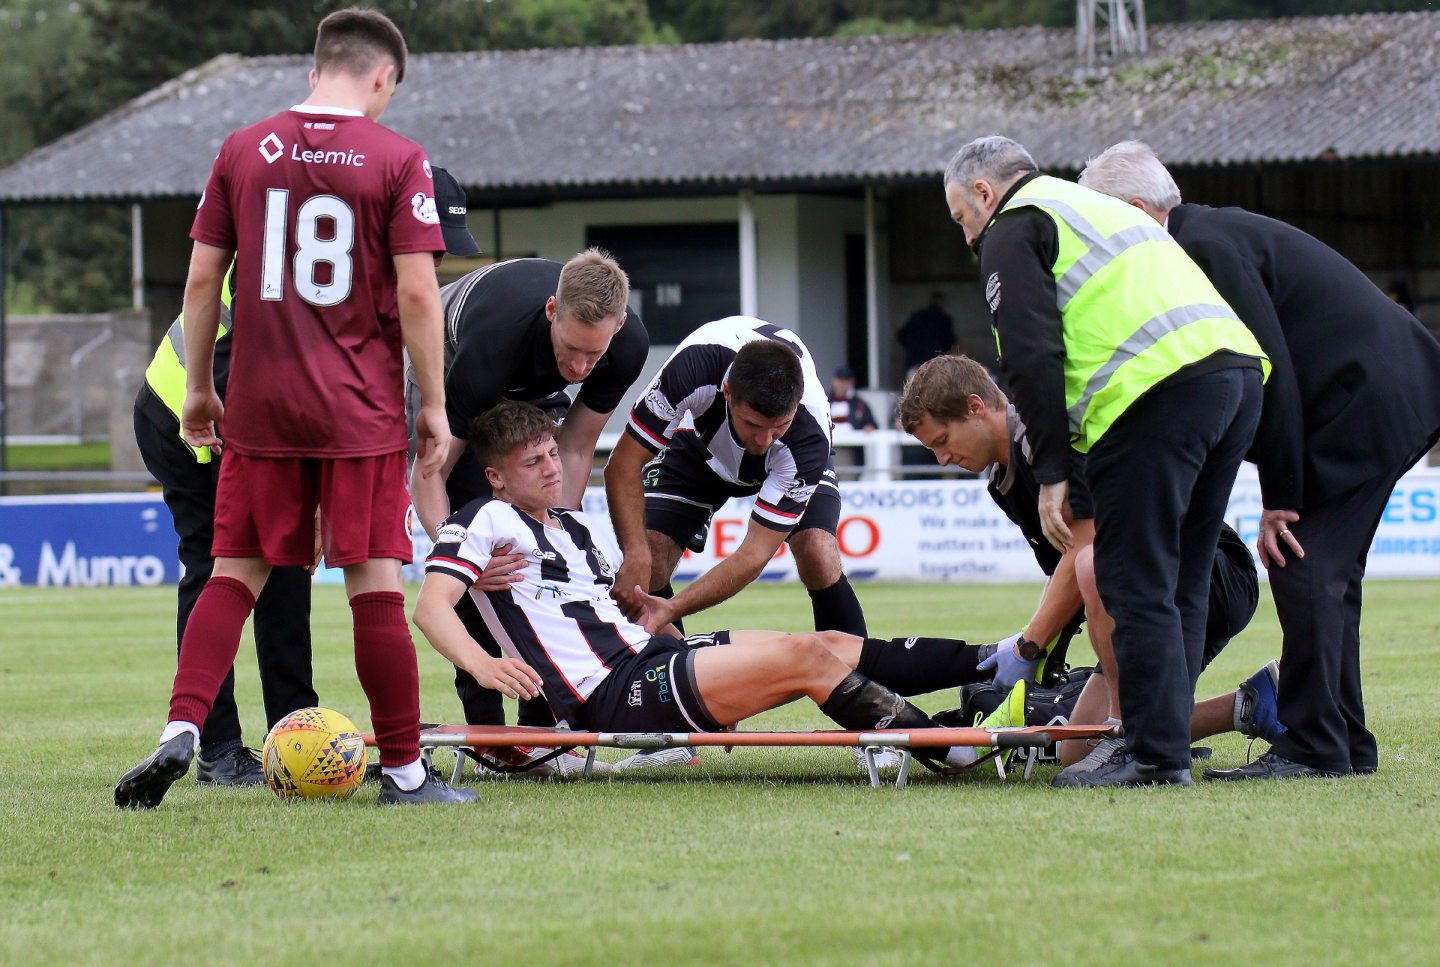 Daniel MacKay gets stretchered off with a damaged left ankle injury.